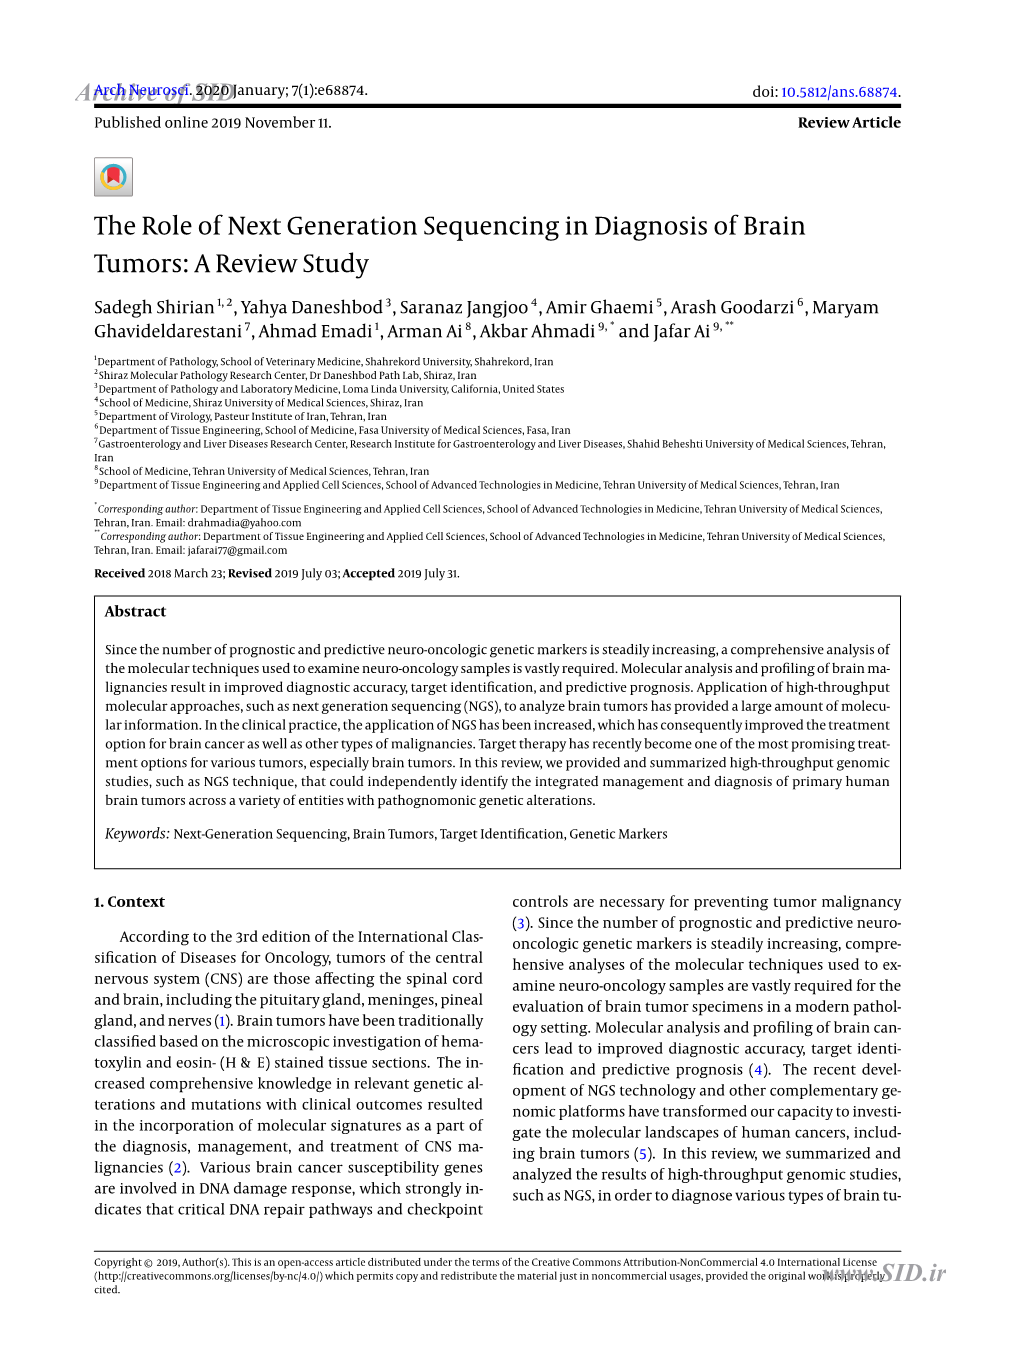 The Role of Next Generation Sequencing in Diagnosis of Brain Tumors: a Review Study